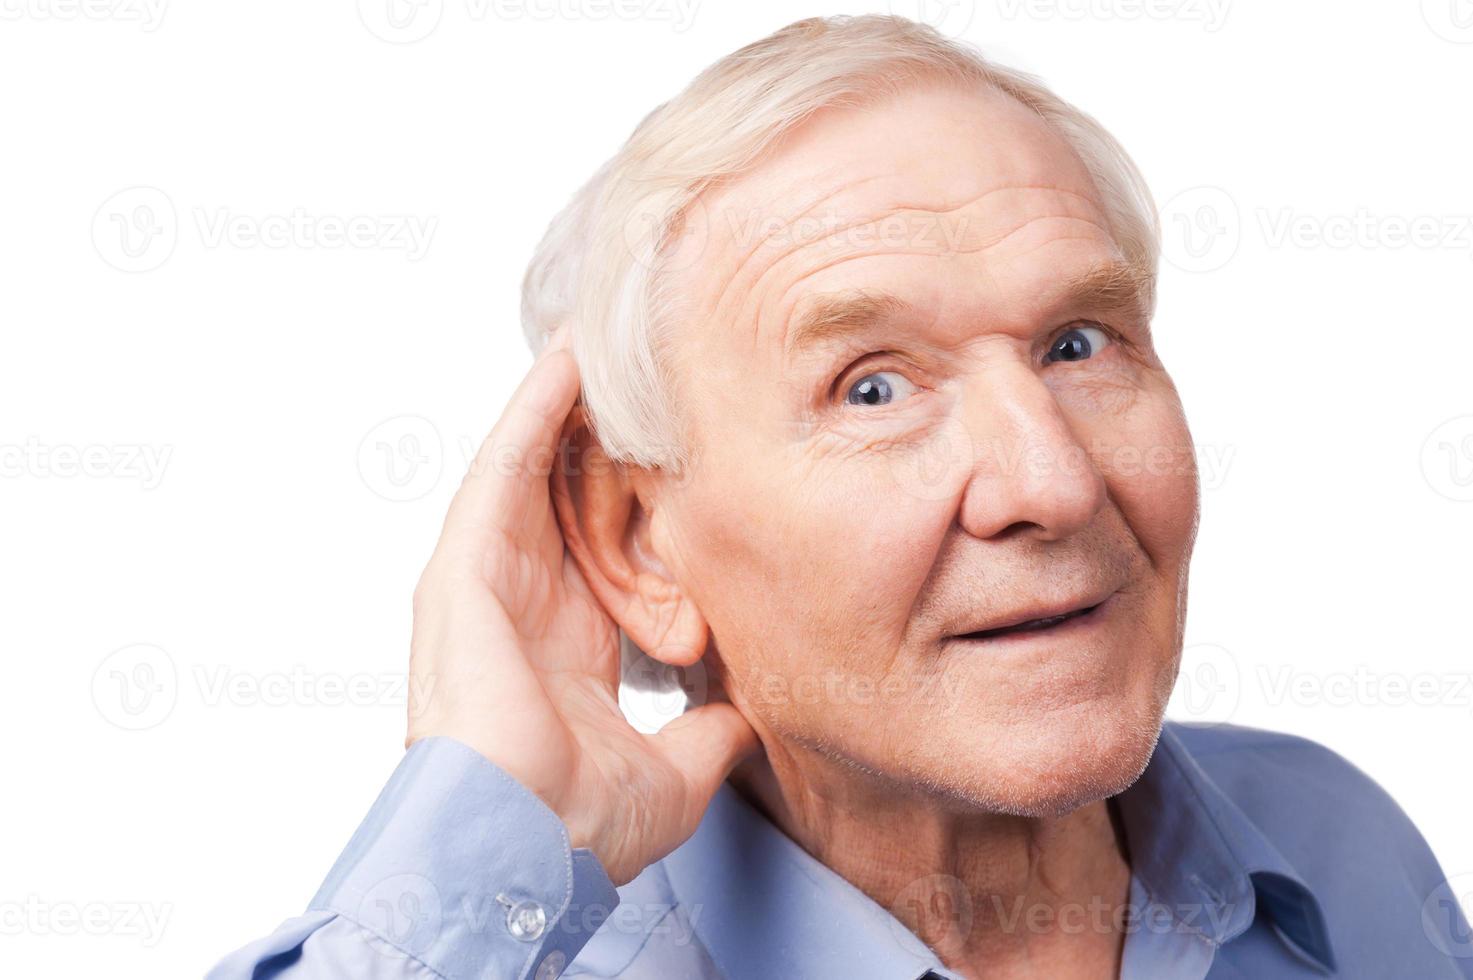 What did you say Handsome senior man holding hand near his ear and smiling while standing against white background photo